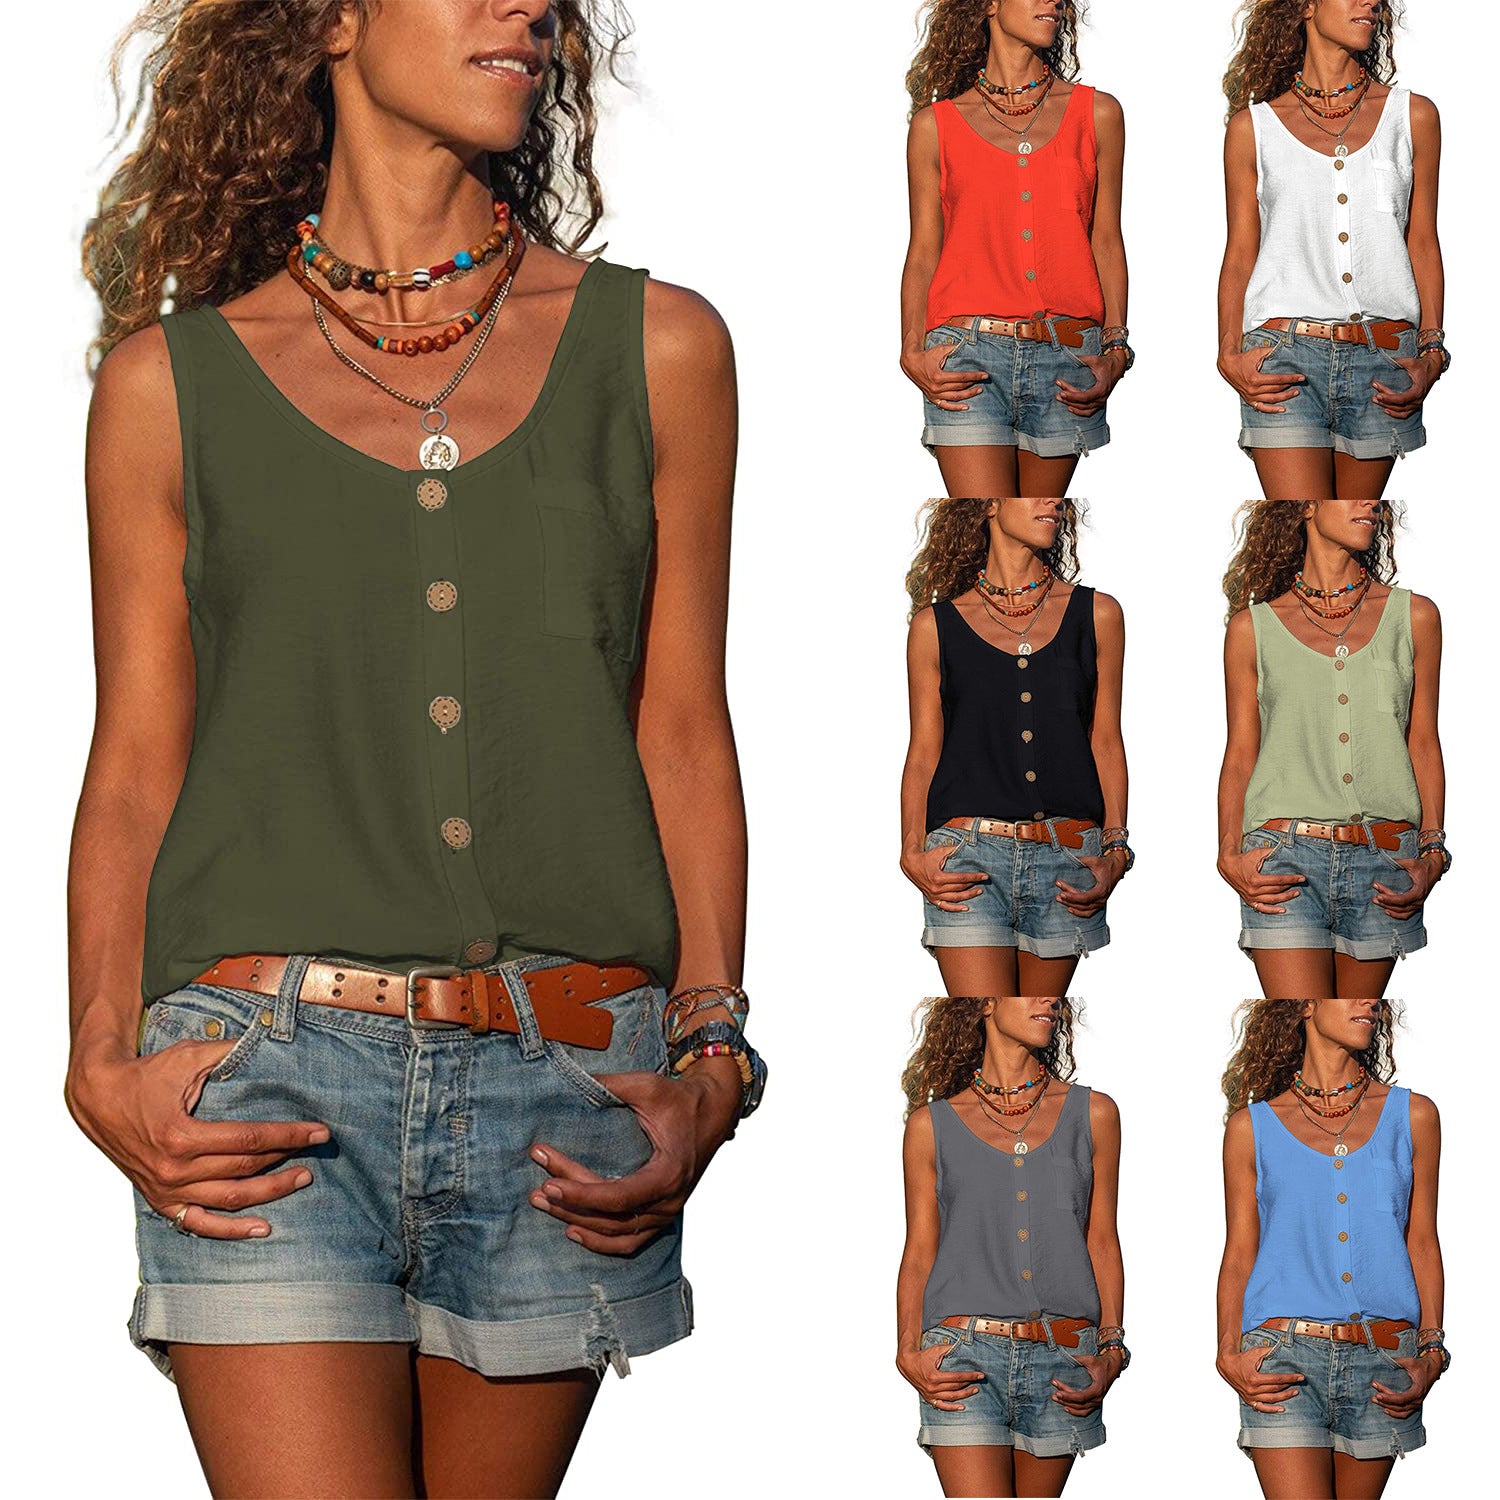 Summer New Solid Color U-neck Vest Button Sleeveless Tank Top with Pocket Ladies Casual T-shirt